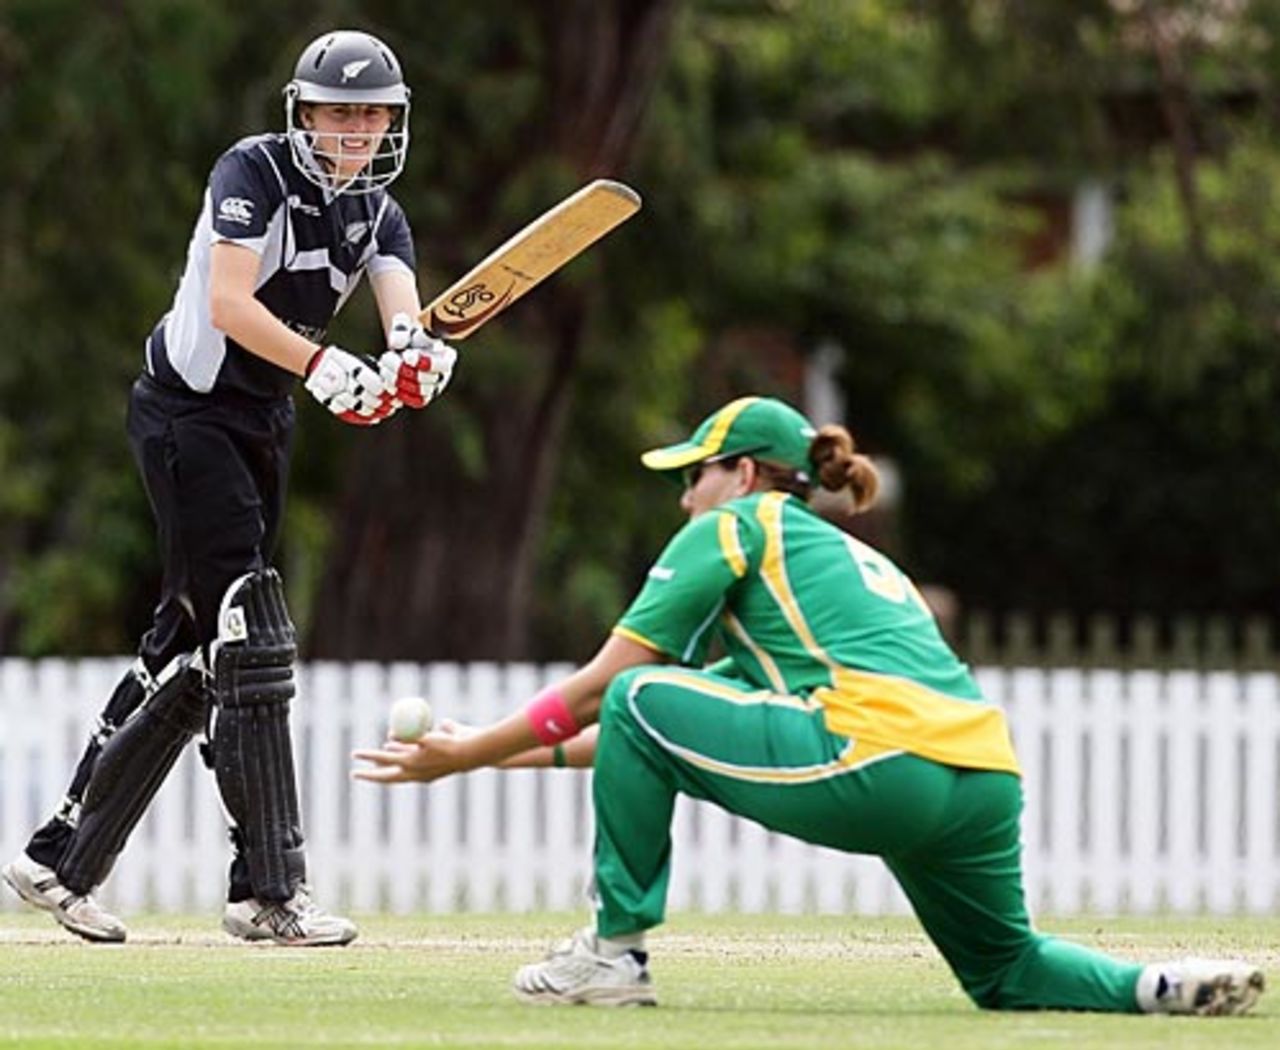 Amy Satterthwaite on her way to a half-century, New Zealand v South Africa, Group A, women's World Cup, Bradman Oval, Bowral, March 12, 2009